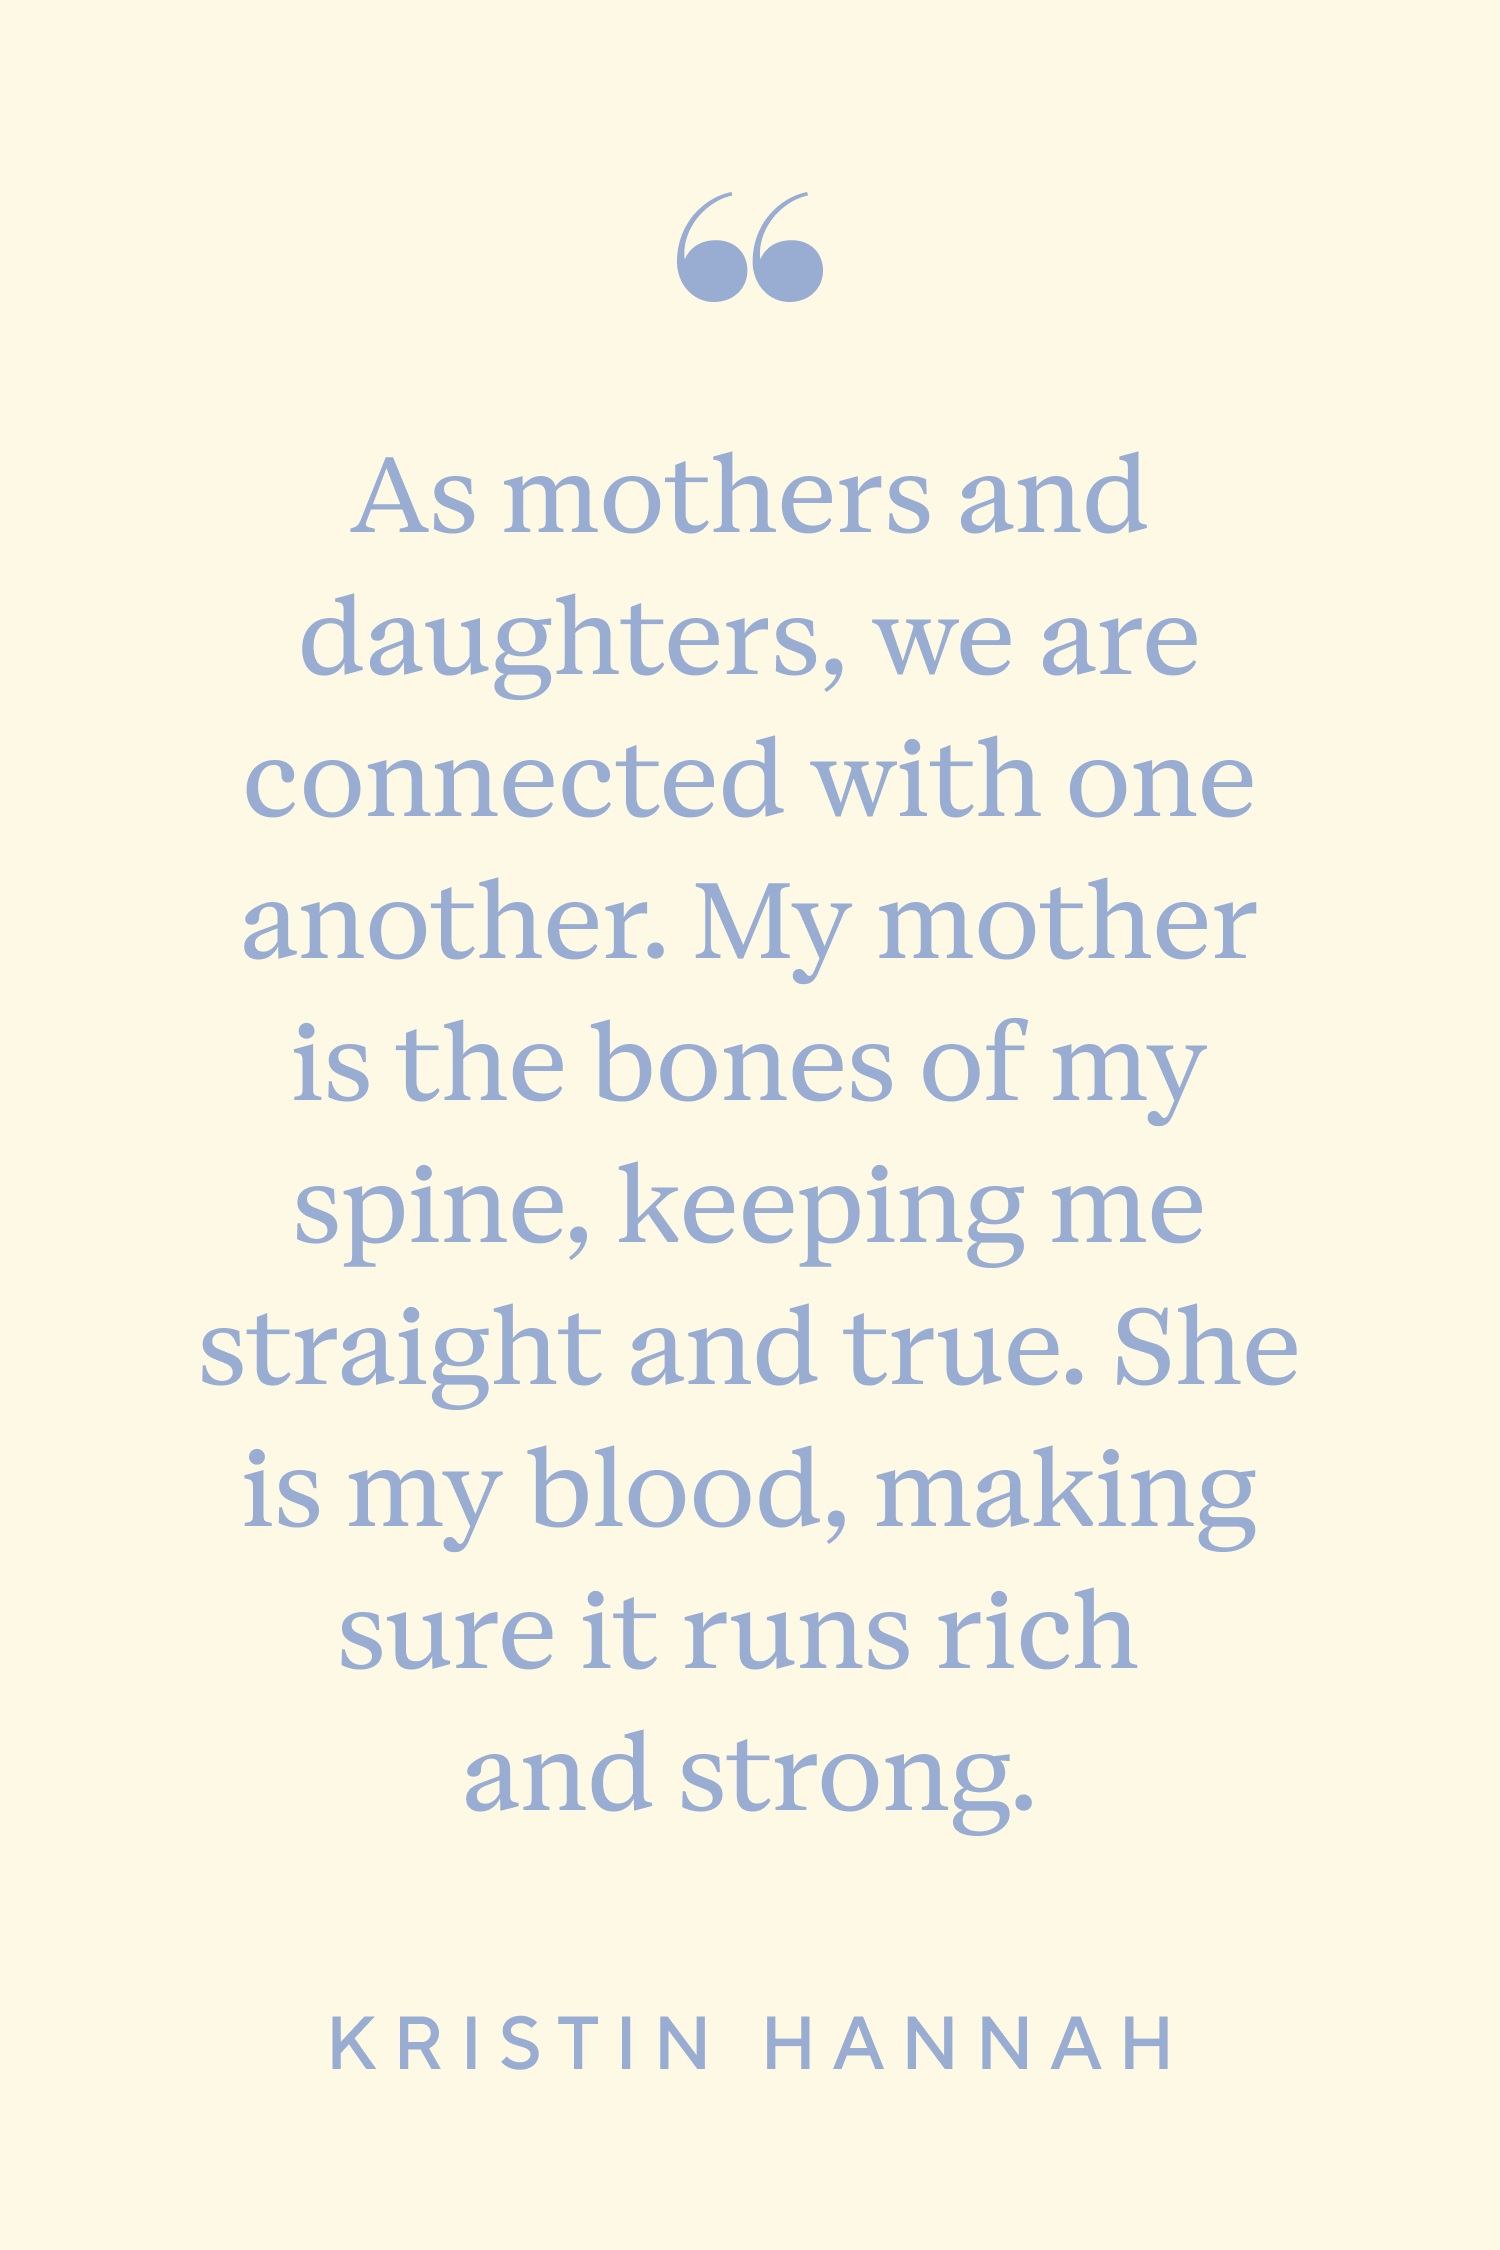 a mother quotes for her children